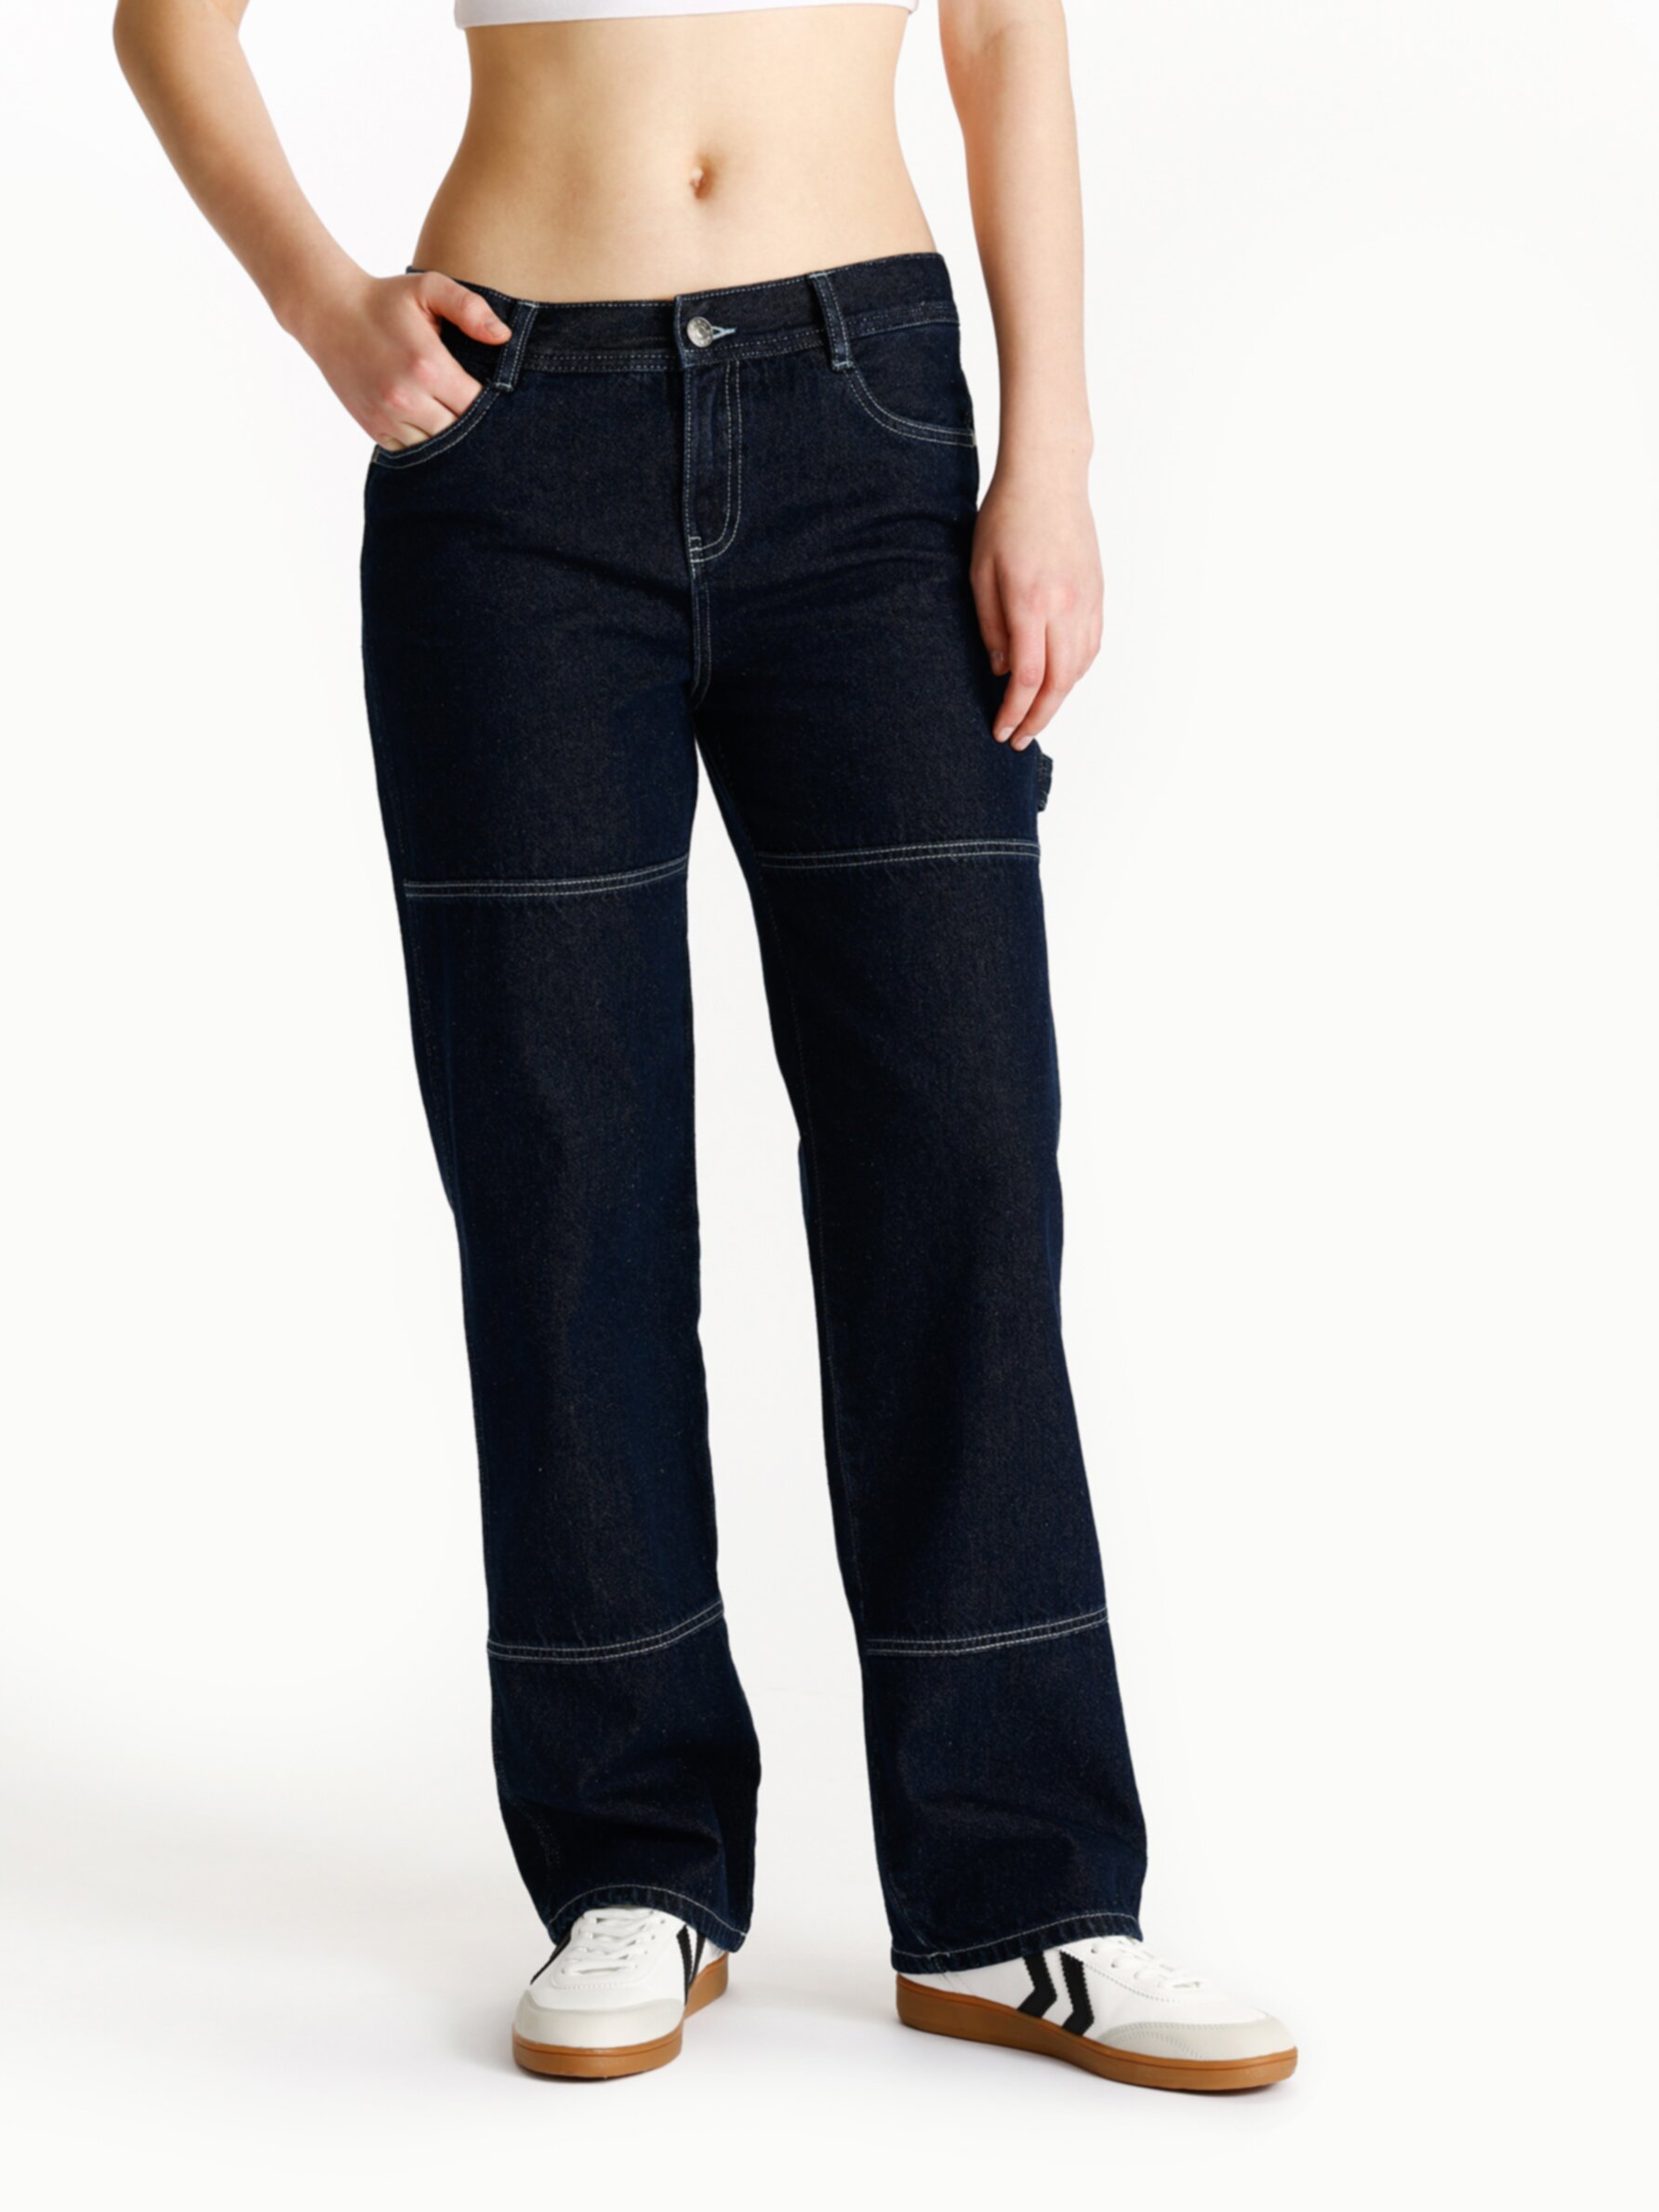 Jeans straight - Jeans - Pantalones - ROPA - Mujer 